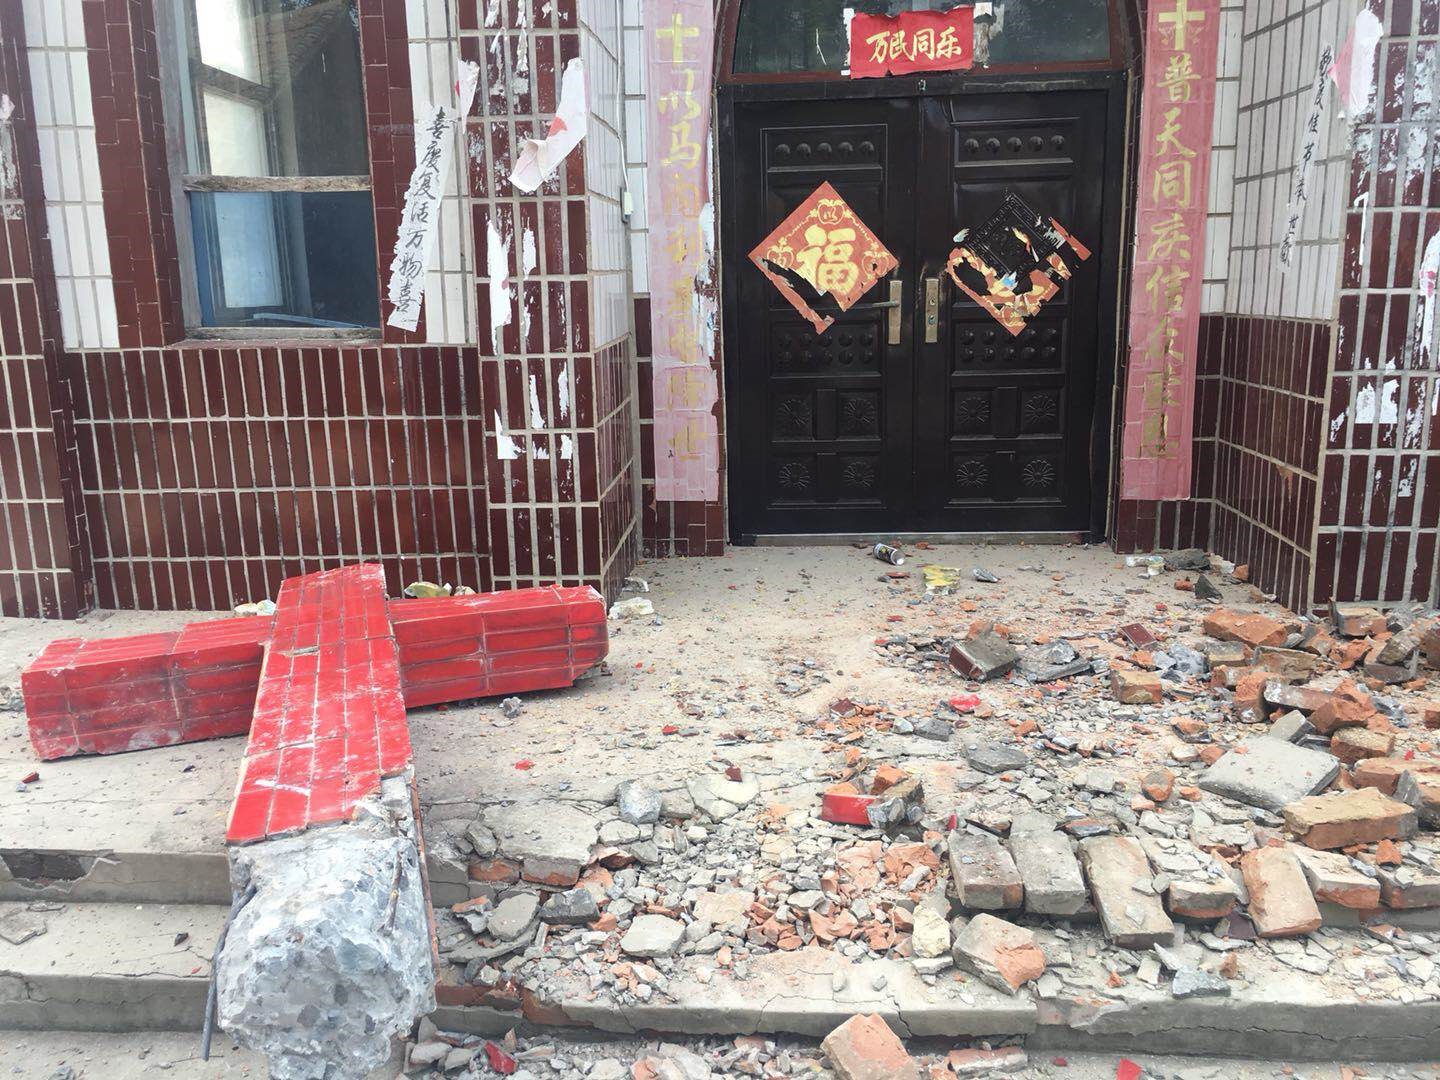 The cross was removed from a church in Pangu Village, Hua Countym, Henan, on Aug. 29, 2018.